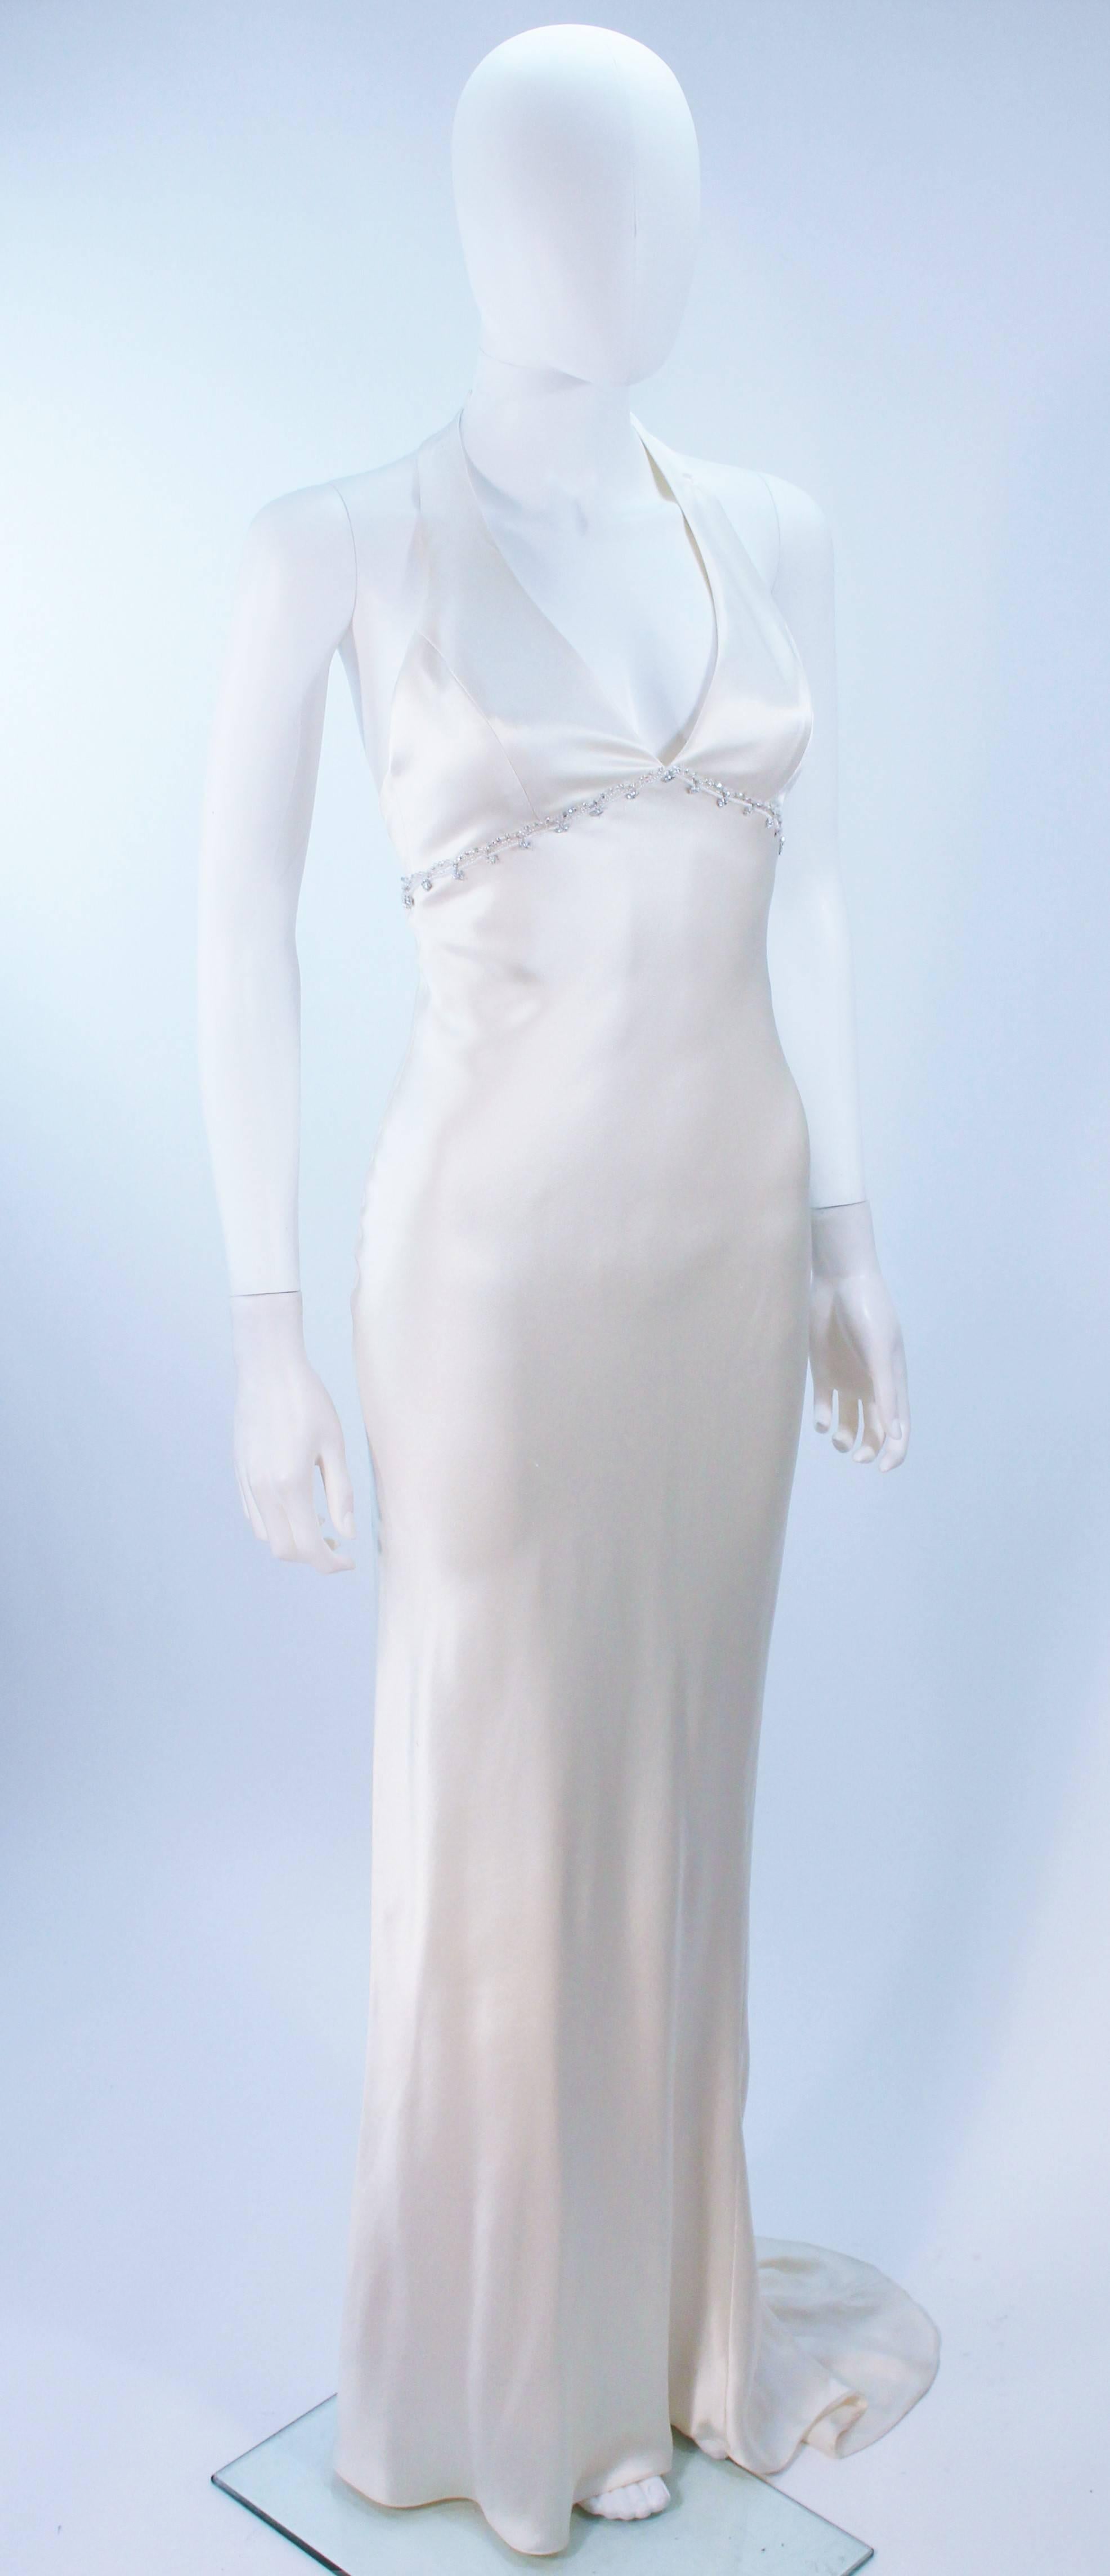  This Monique Lhuillier  gown is composed of a white bias cut silk and features a rhinestone applique at the empire waistline. There is a center back zipper closure, and train. In excellent vintage condition. 

  **Please cross-reference